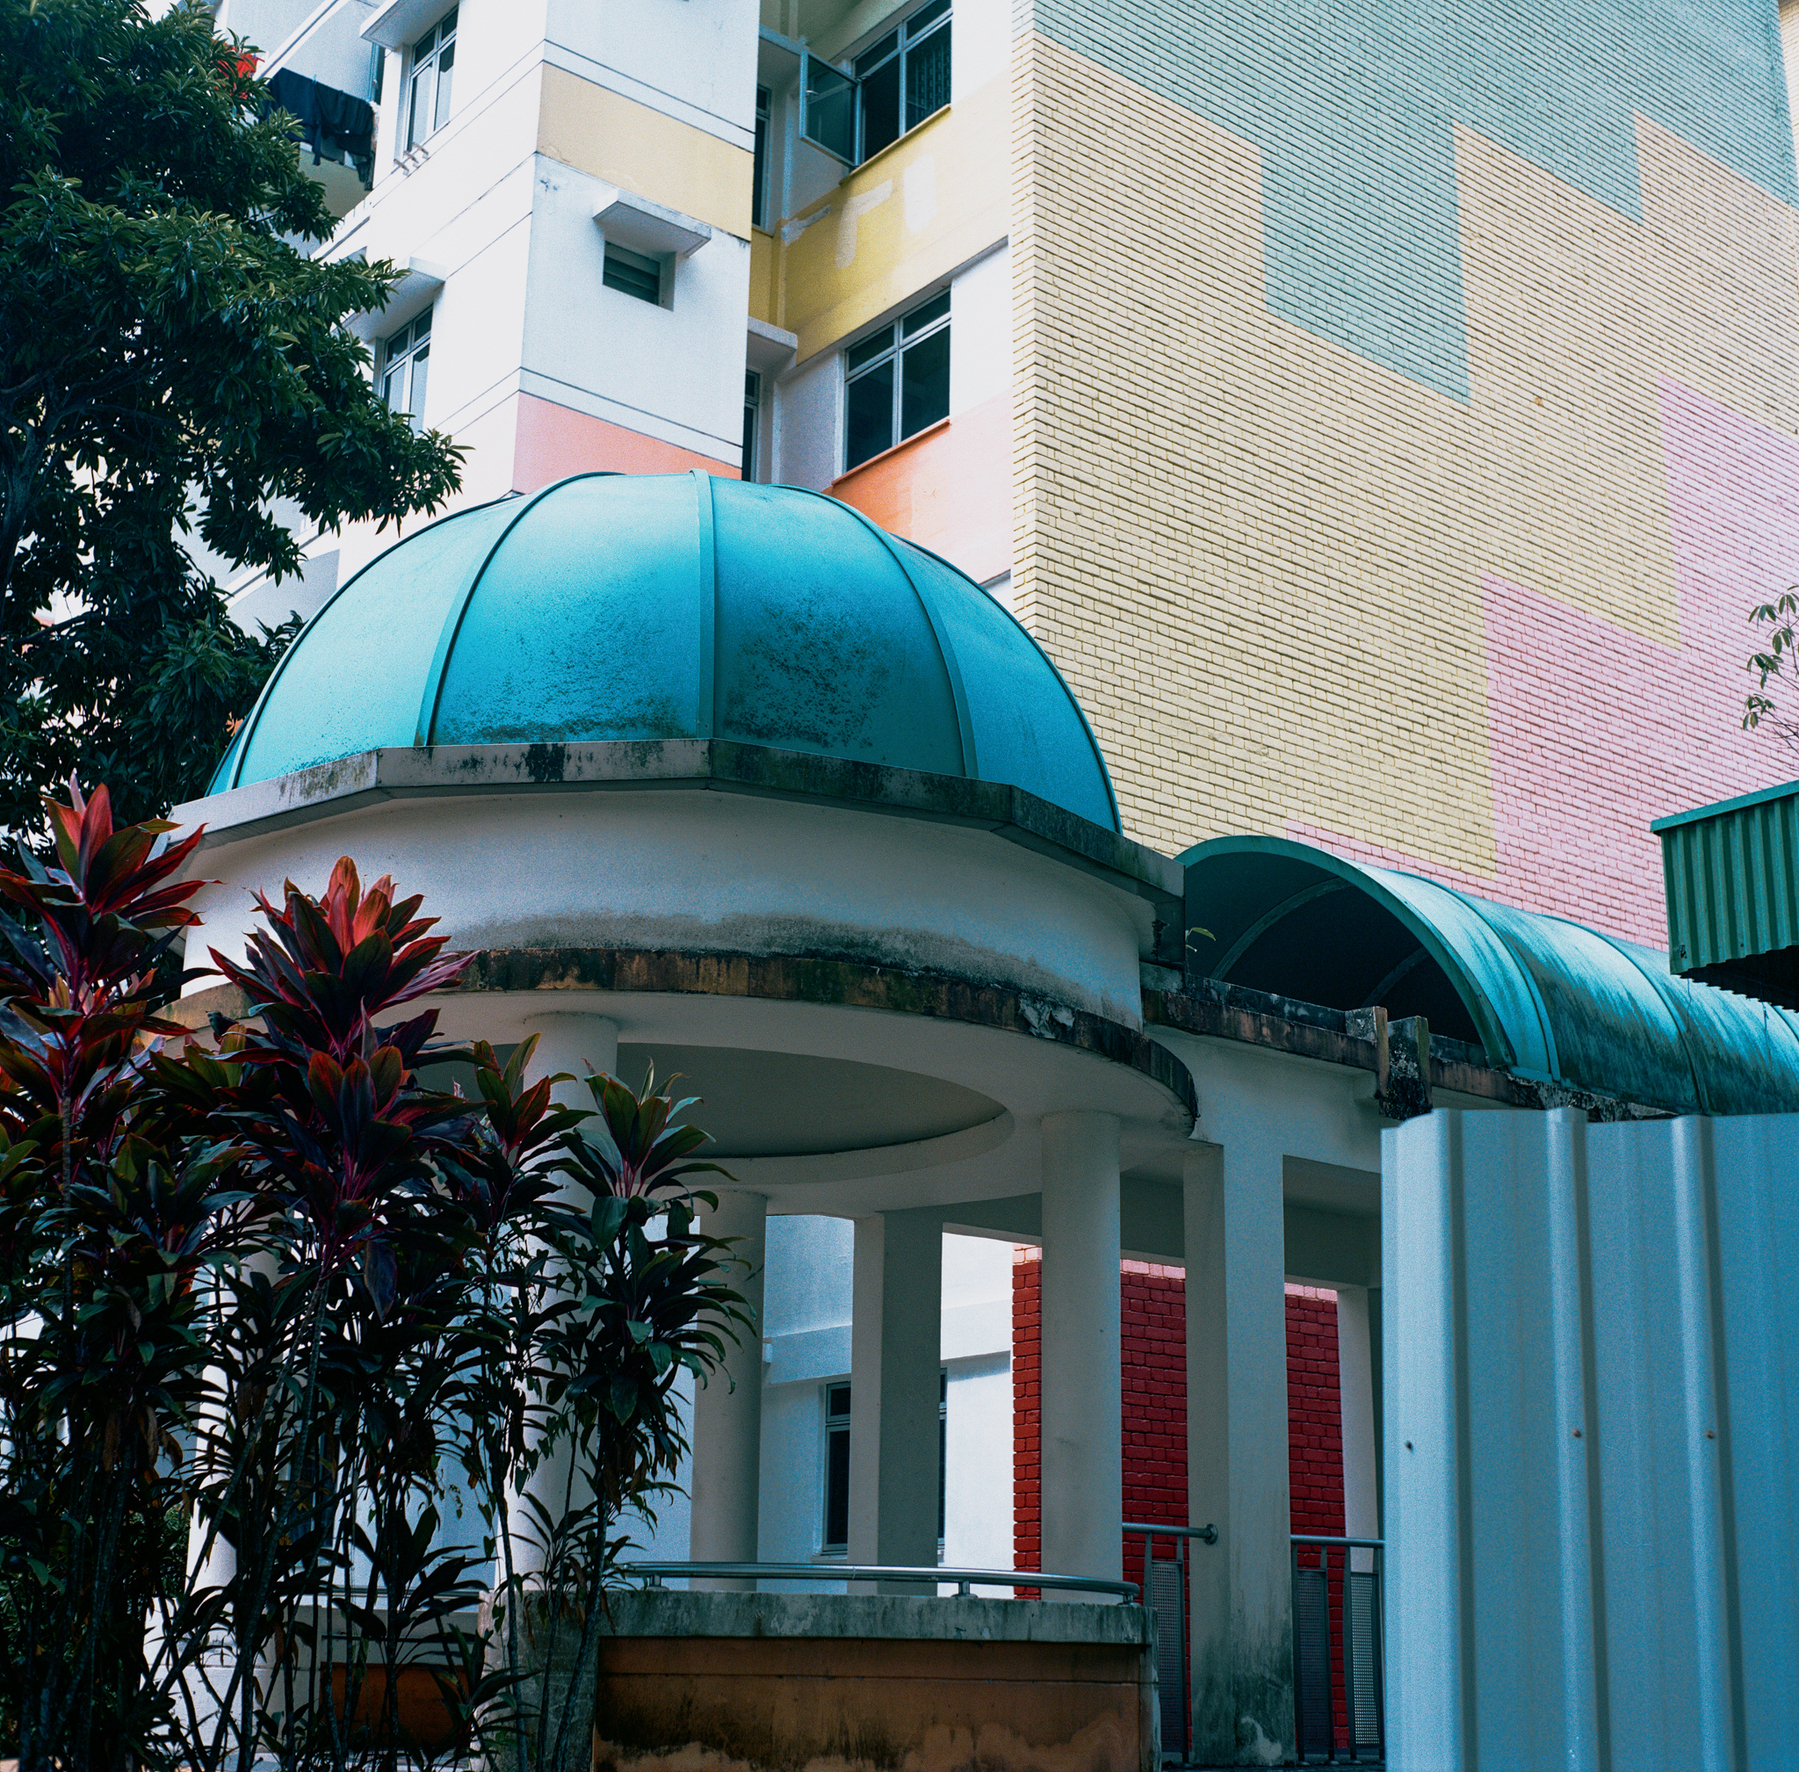 A scan of a color photo of an abandoned public housing neighborhood in Singapore with pastel colors and a dome